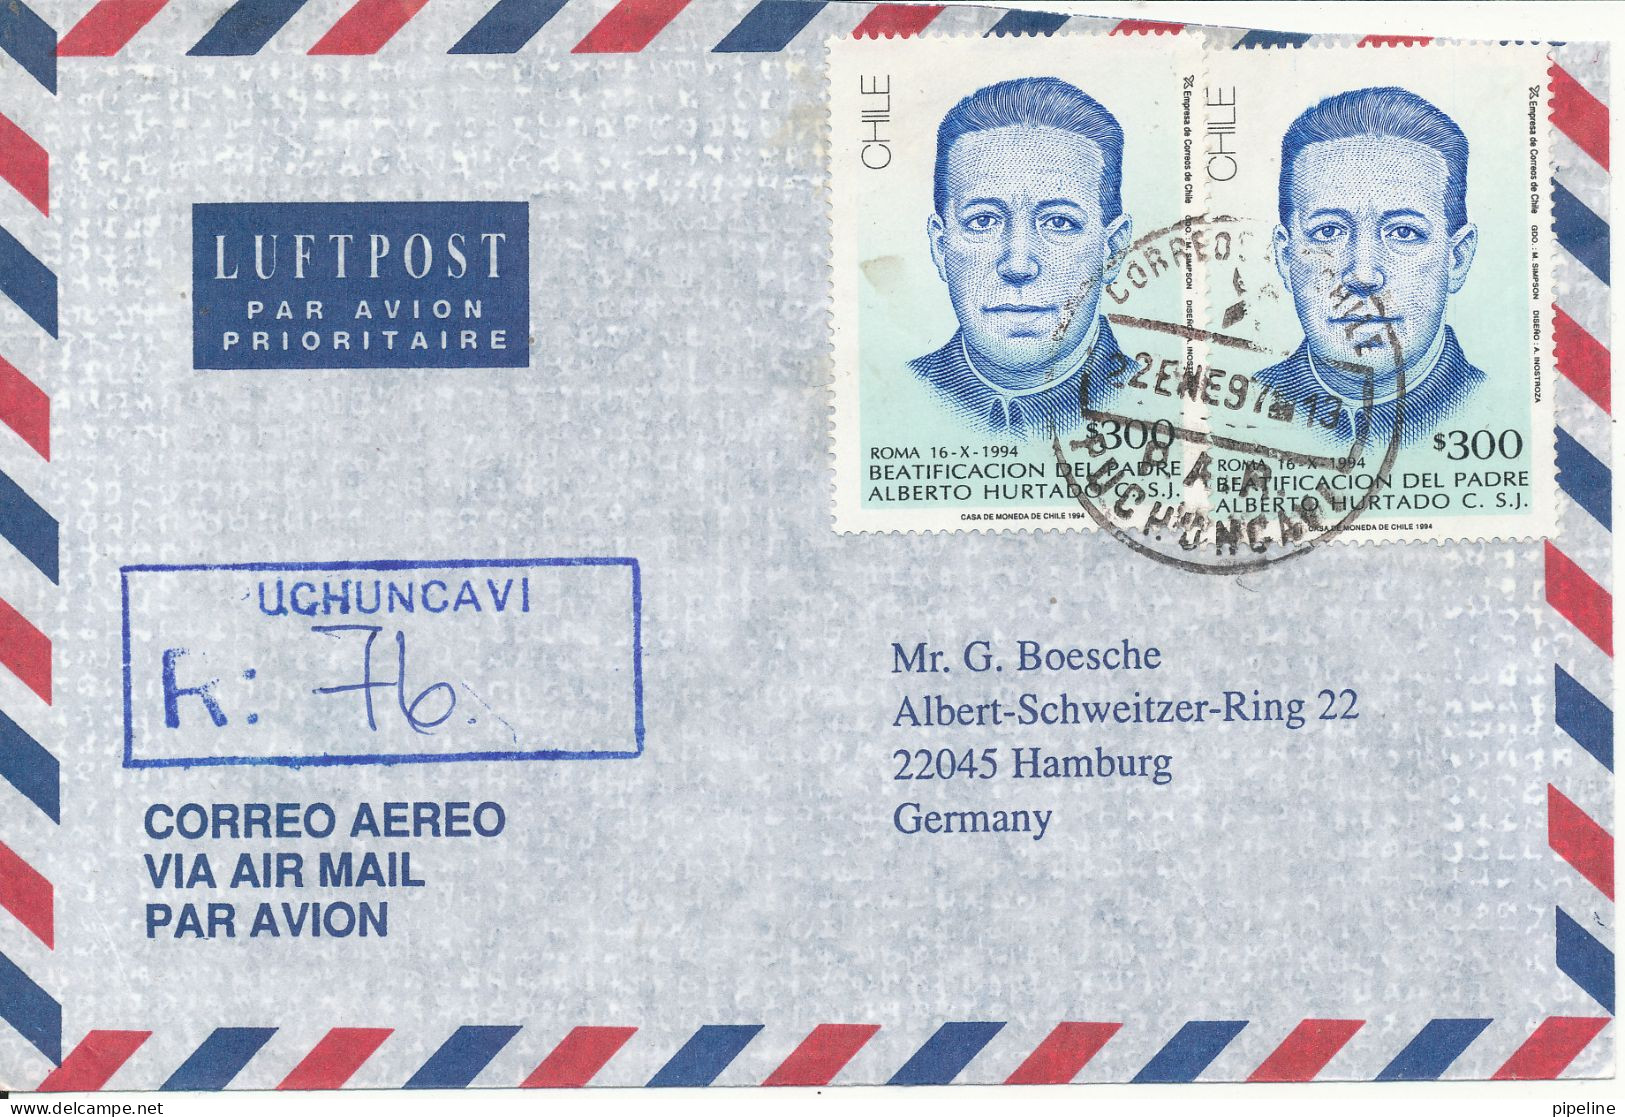 Chile Registered Air Mail Cover Sent To Germany 22-1-1997 - Chile